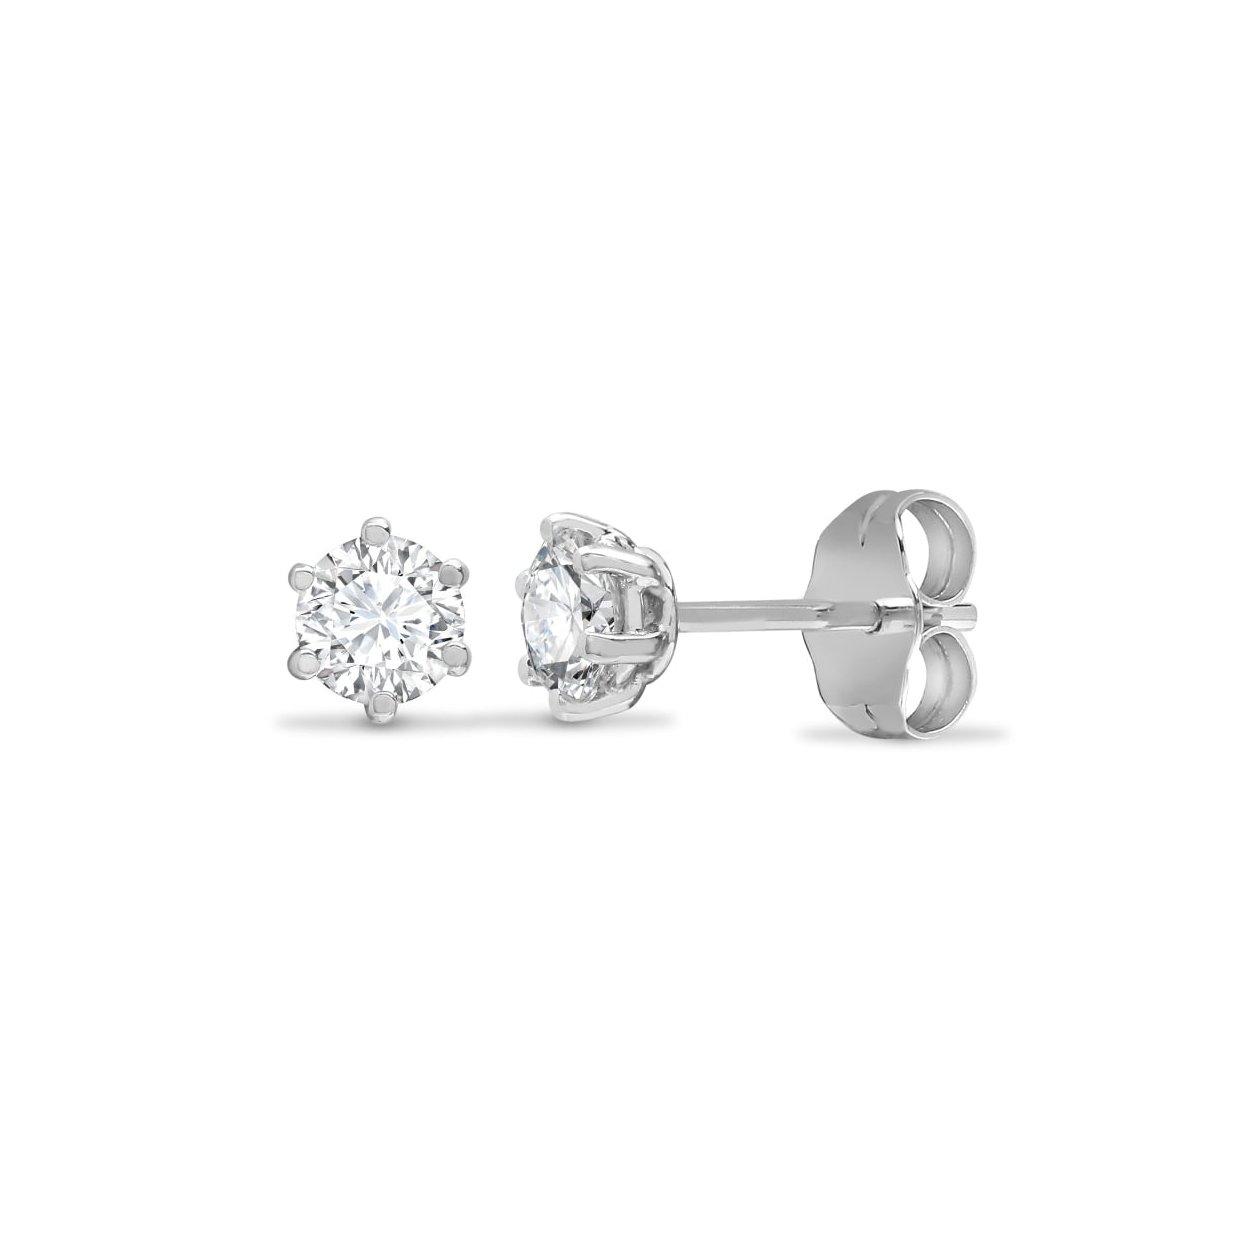 9ct White Gold  CZ 6 Claw Solitaire Stud Earrings, 3mm - JES175